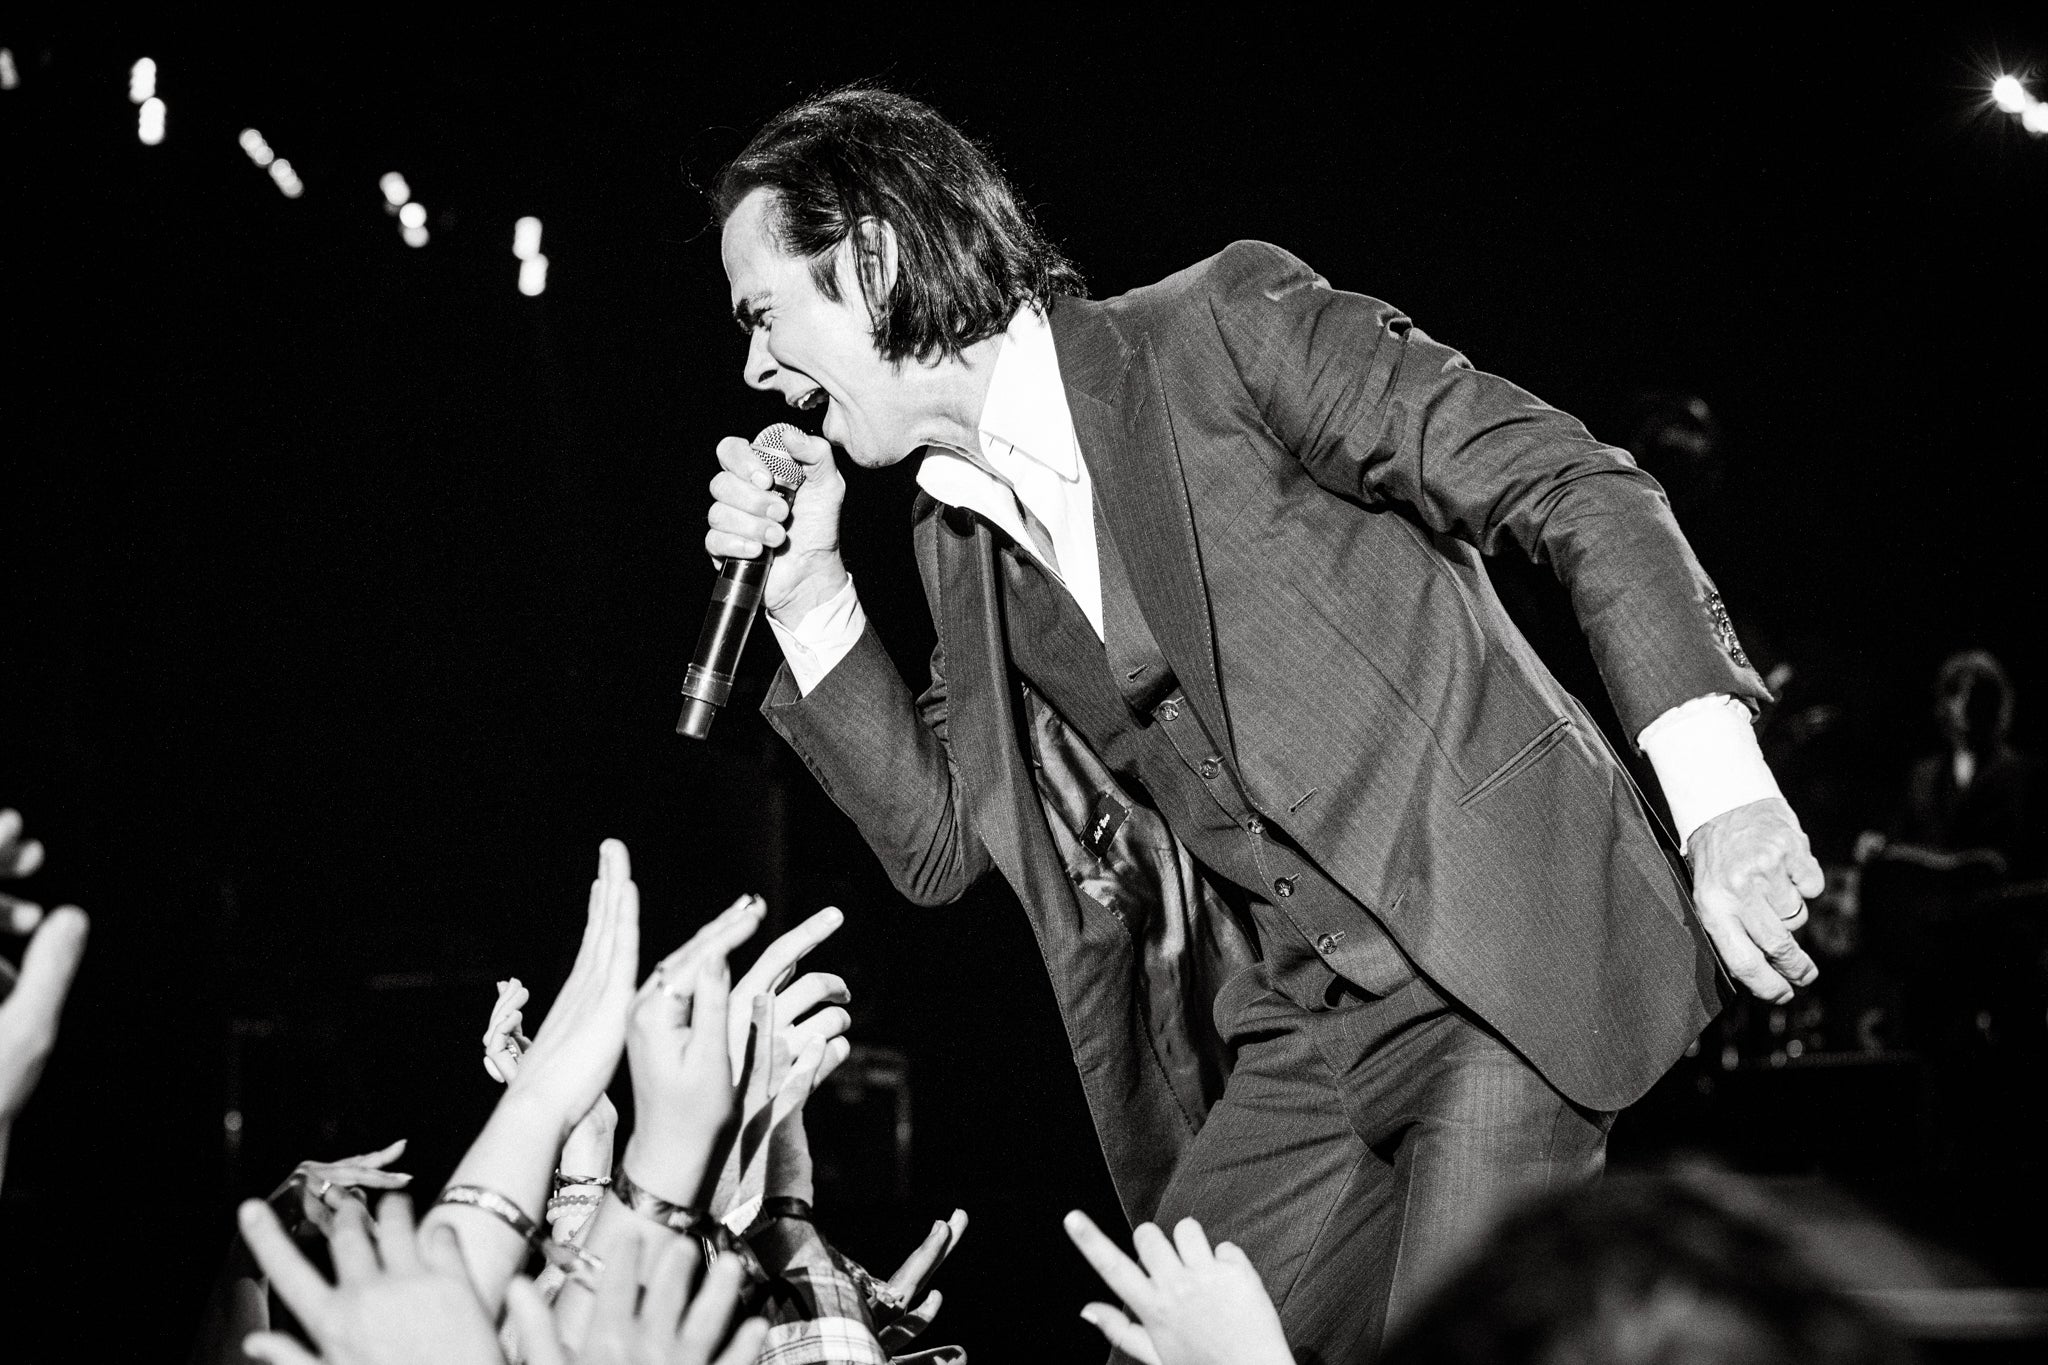 Nick Cave & the Bad Seeds: The Wild God Tour Event Title Pic